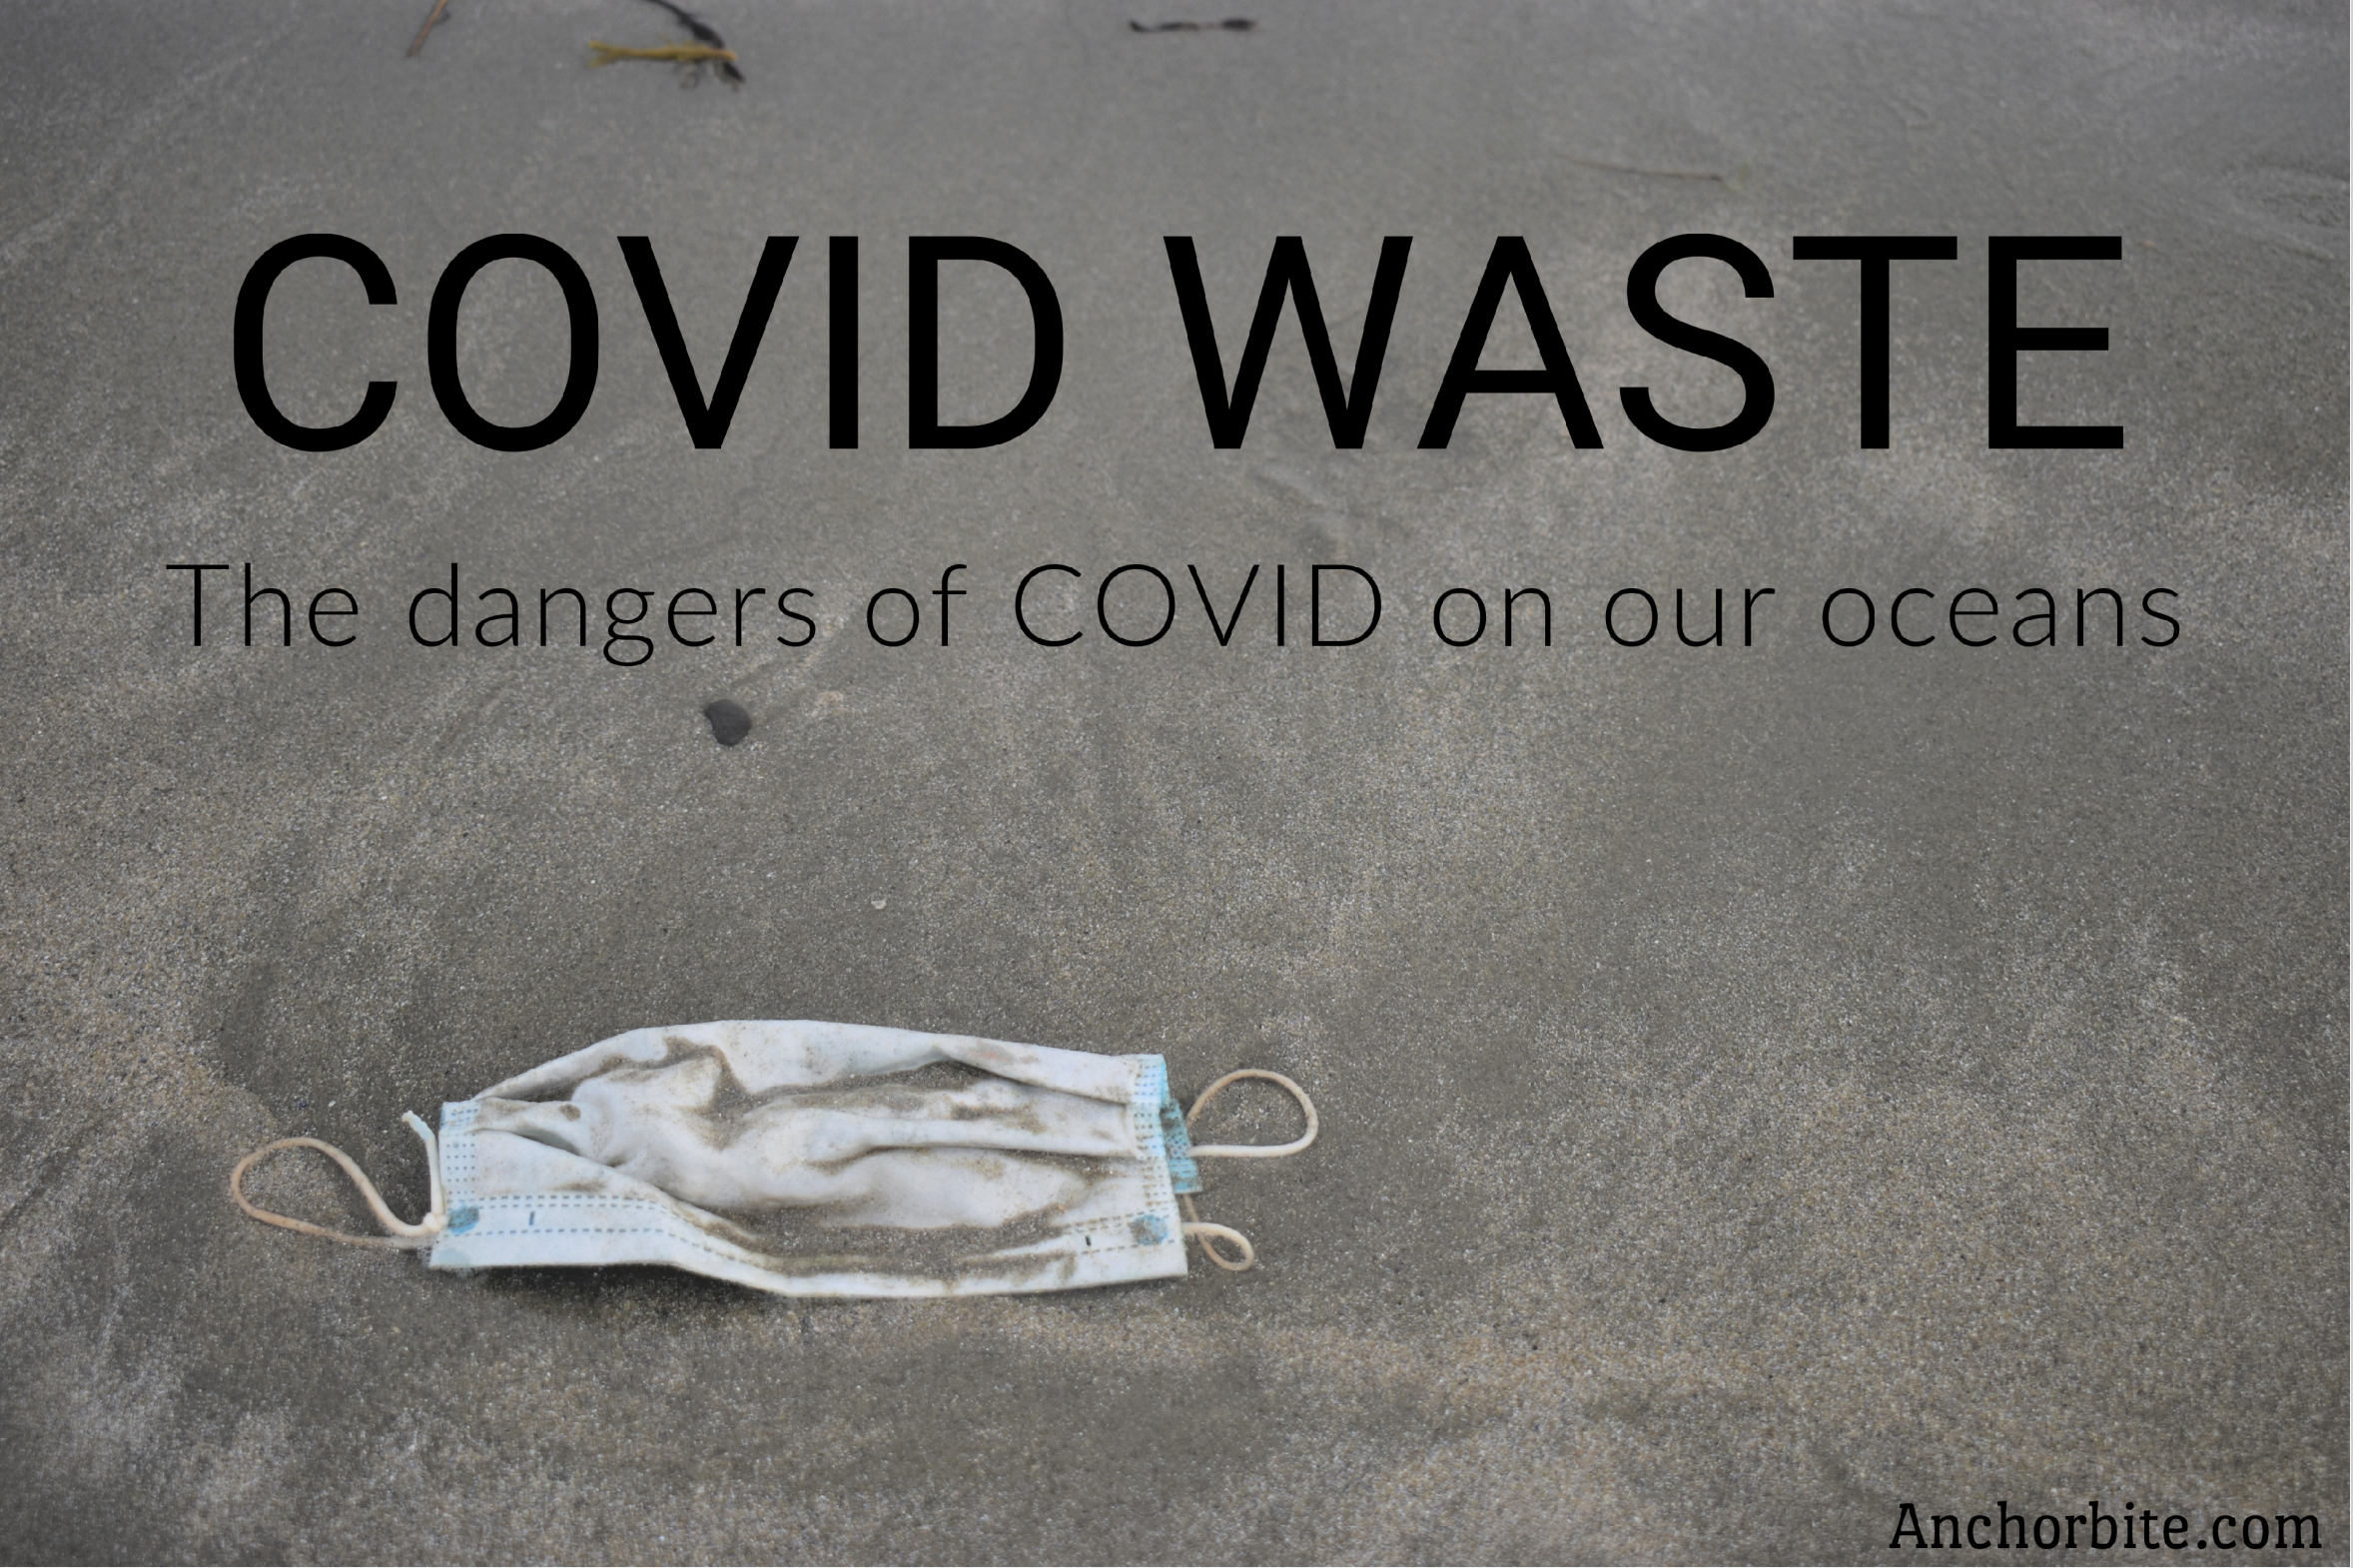 COVID Waste: The dangers of COVID on our oceans